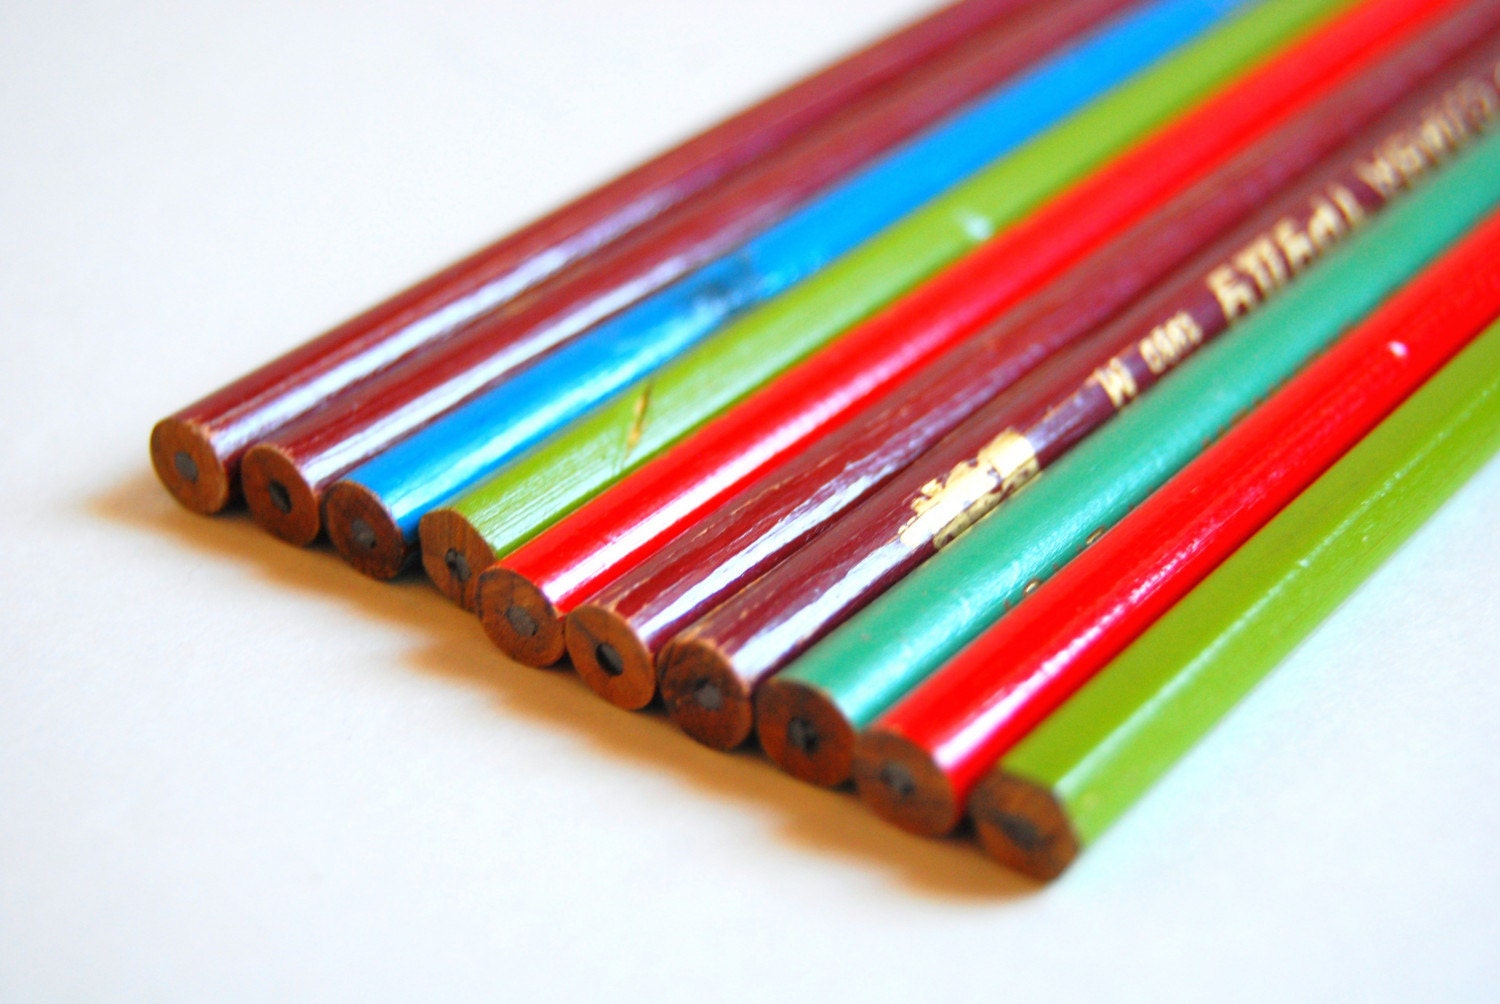 A set of 10 vintage pencils from Soviet Union